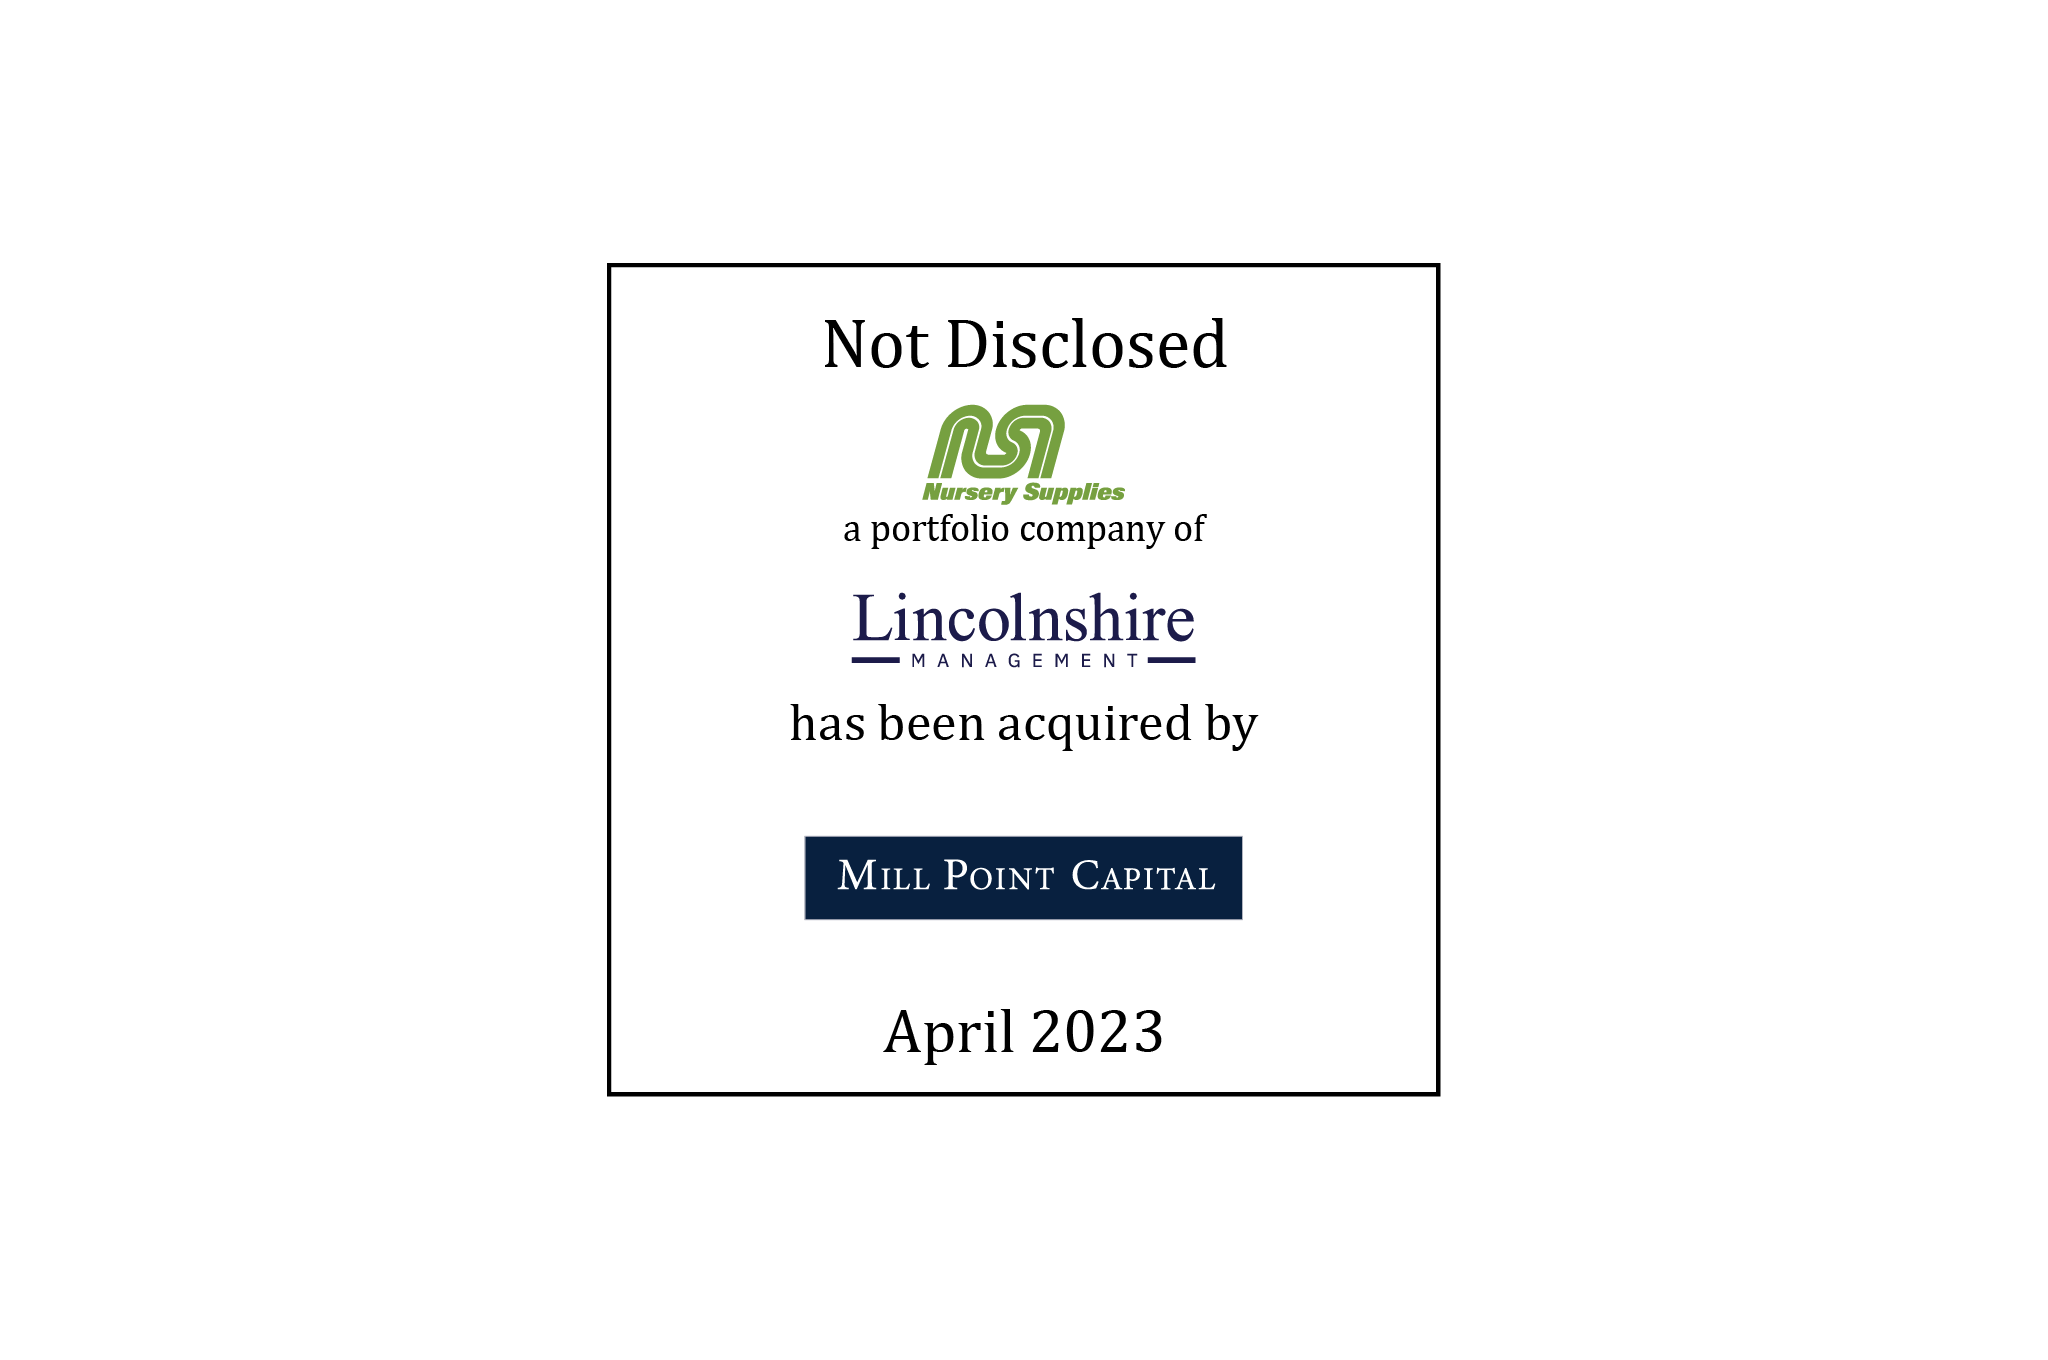 Not Disclosed | Nursery Supplies (logo), a portfolio company of Lincolnshire Management, Has Been Acquired by Mill Point Capital (logo) | April 2023